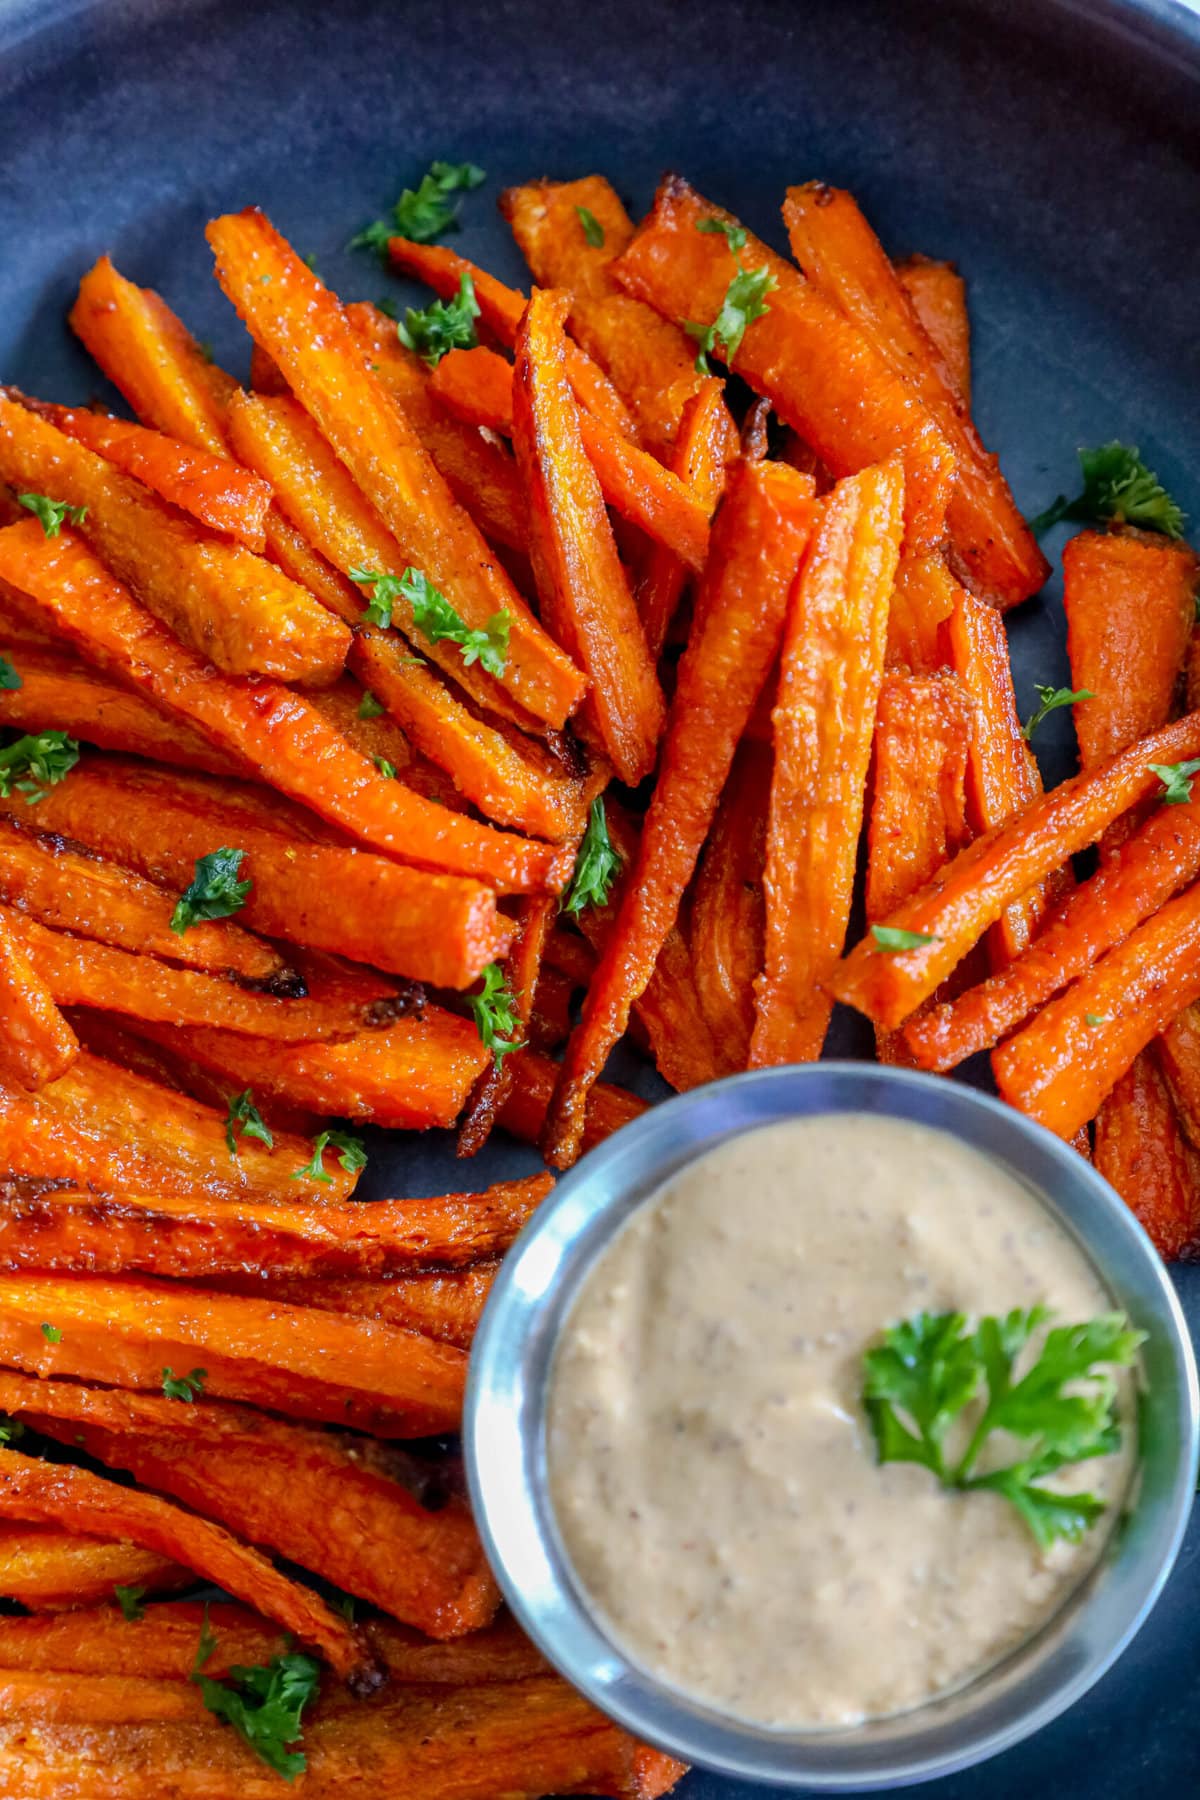 picture of carrot fries with parsley chopped on top on a black plate with a cup of sauce on the side